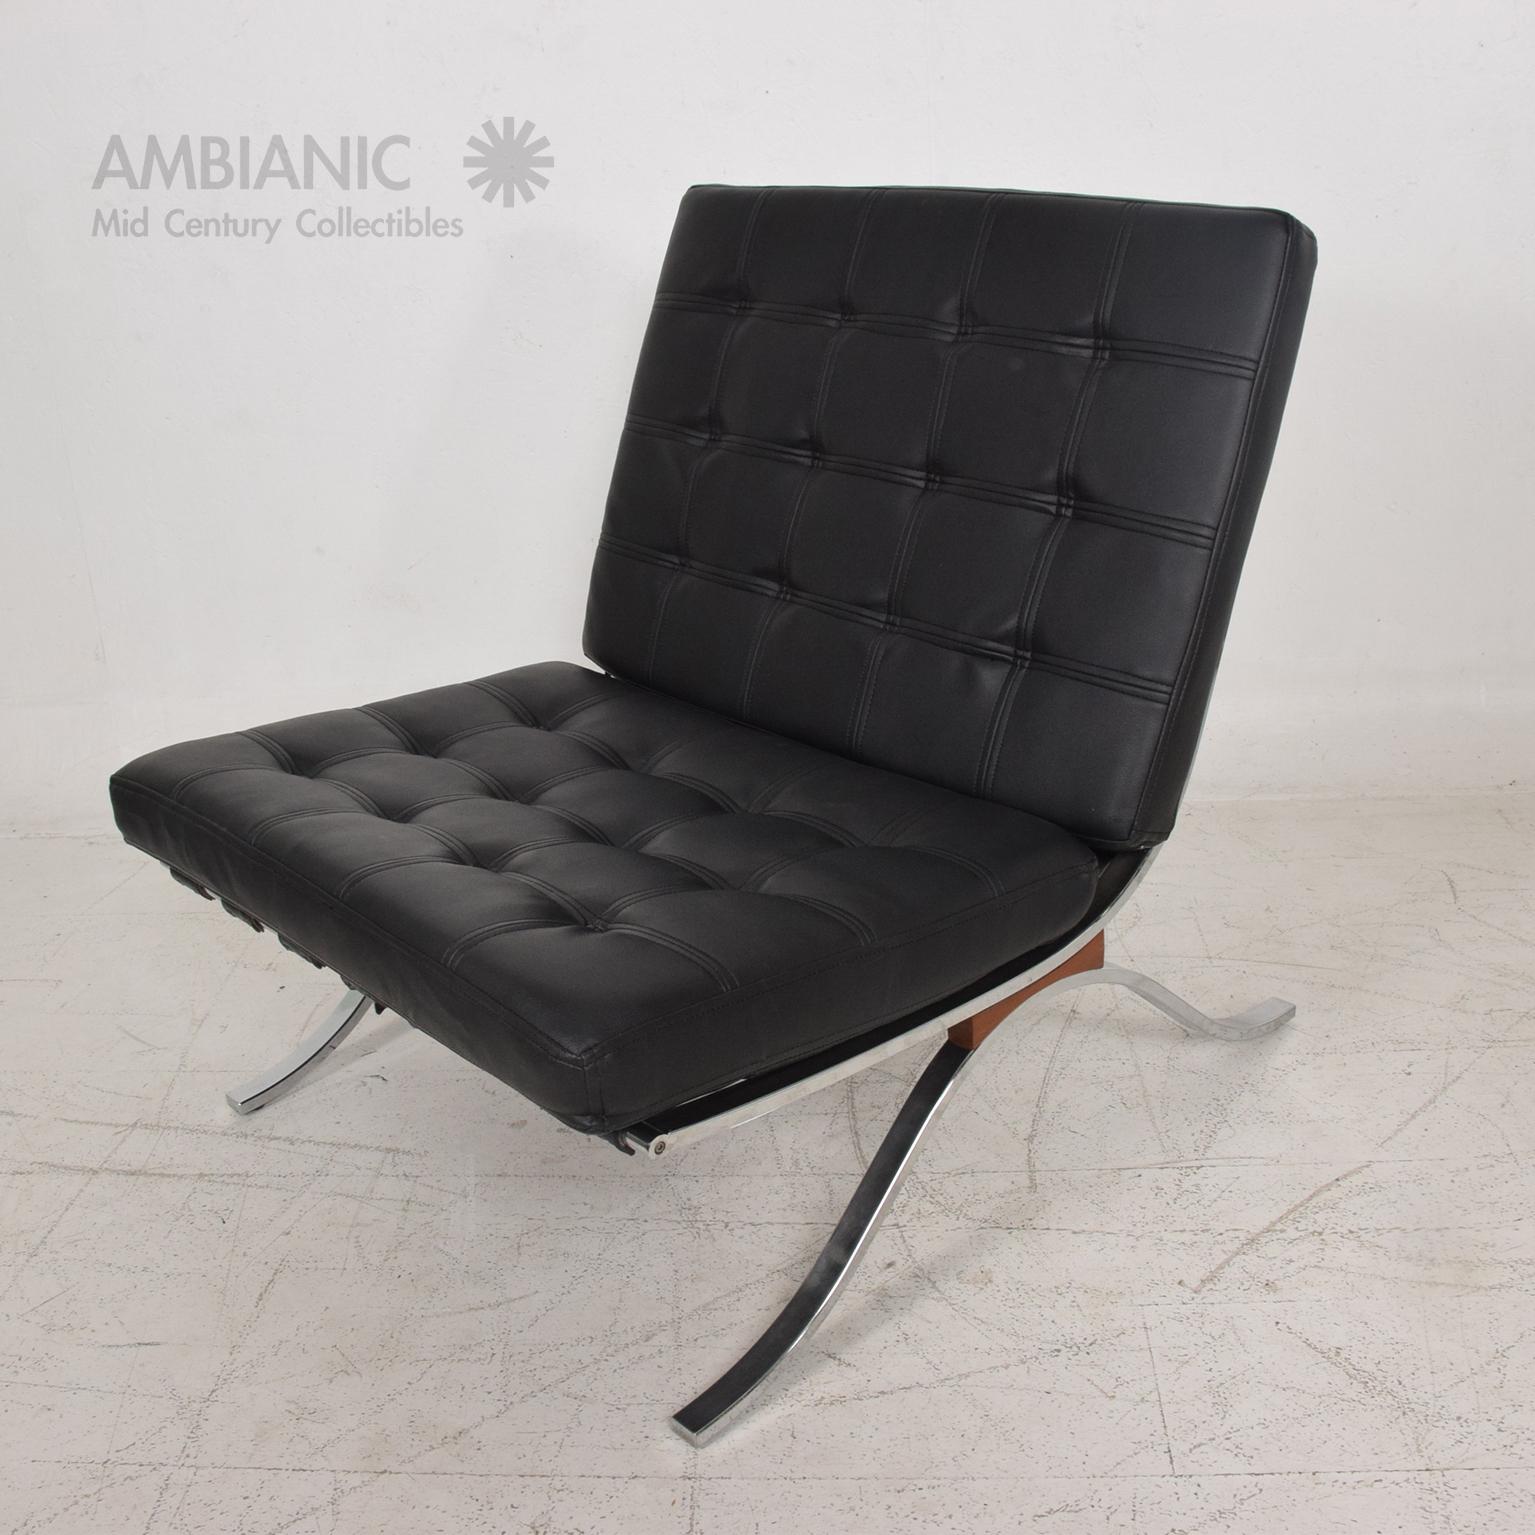 Mid-20th Century Mid-Century Modern SELIG Barcelona Lounge Chair in Chrome and Faux Leather 1960s